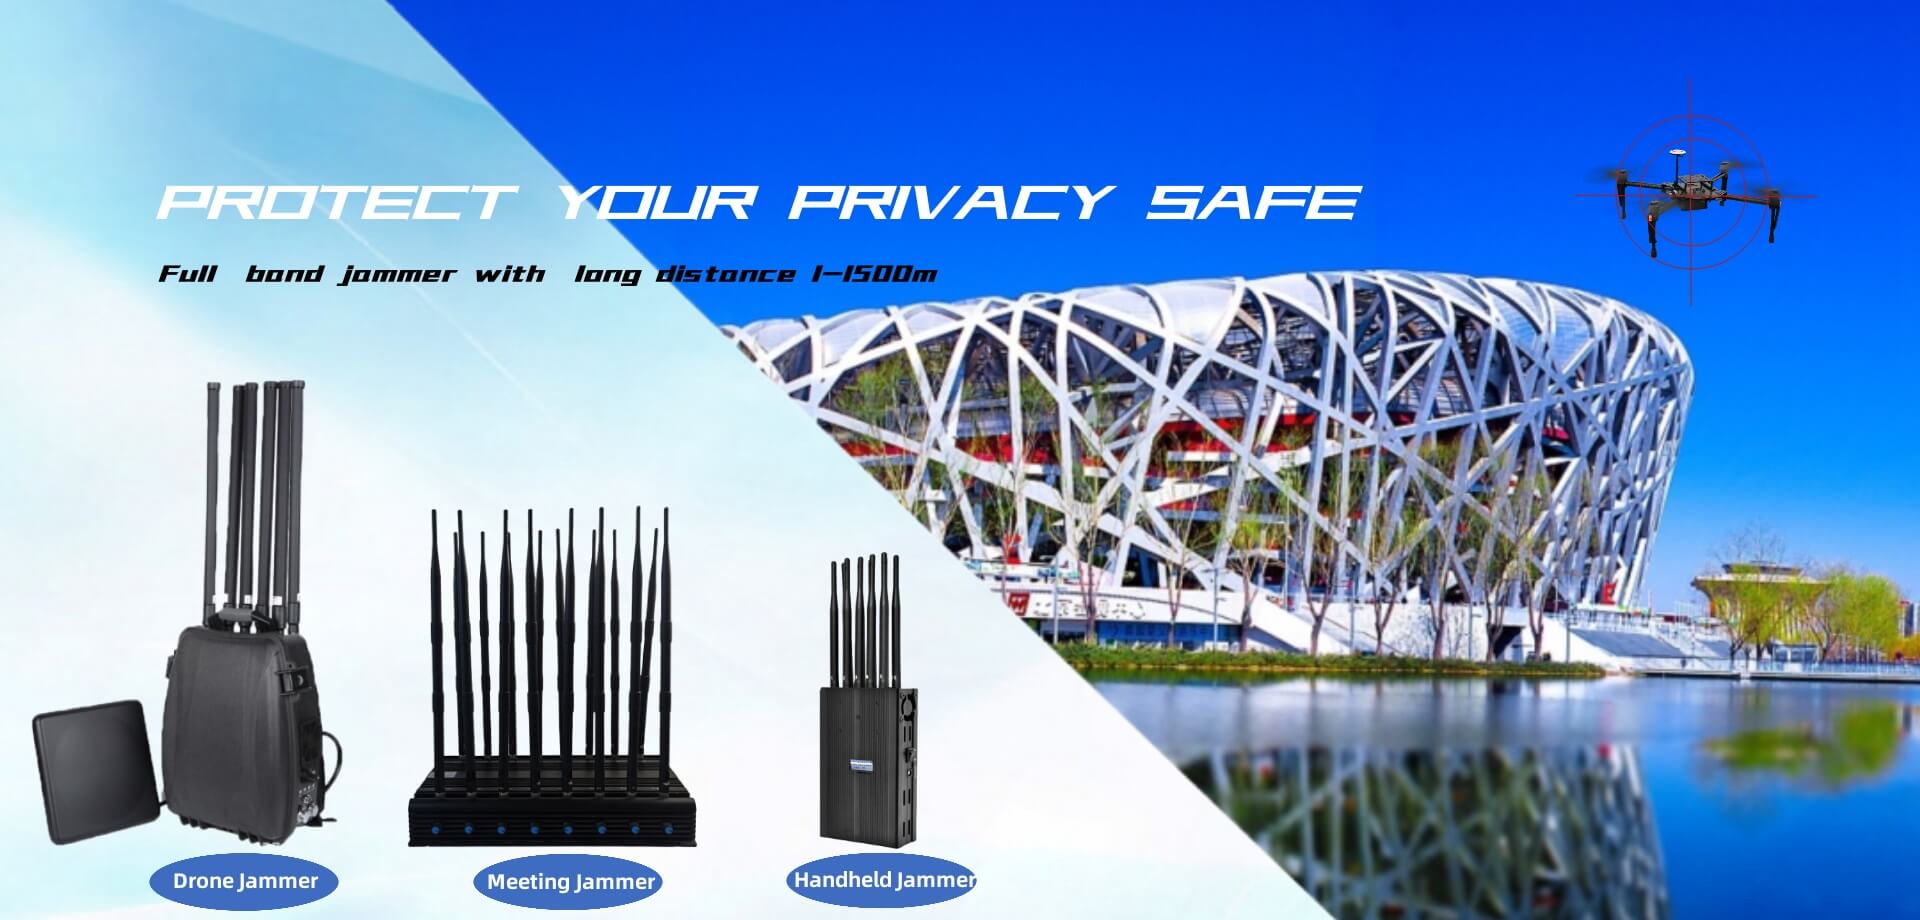 Wholesale wireless signal jammers